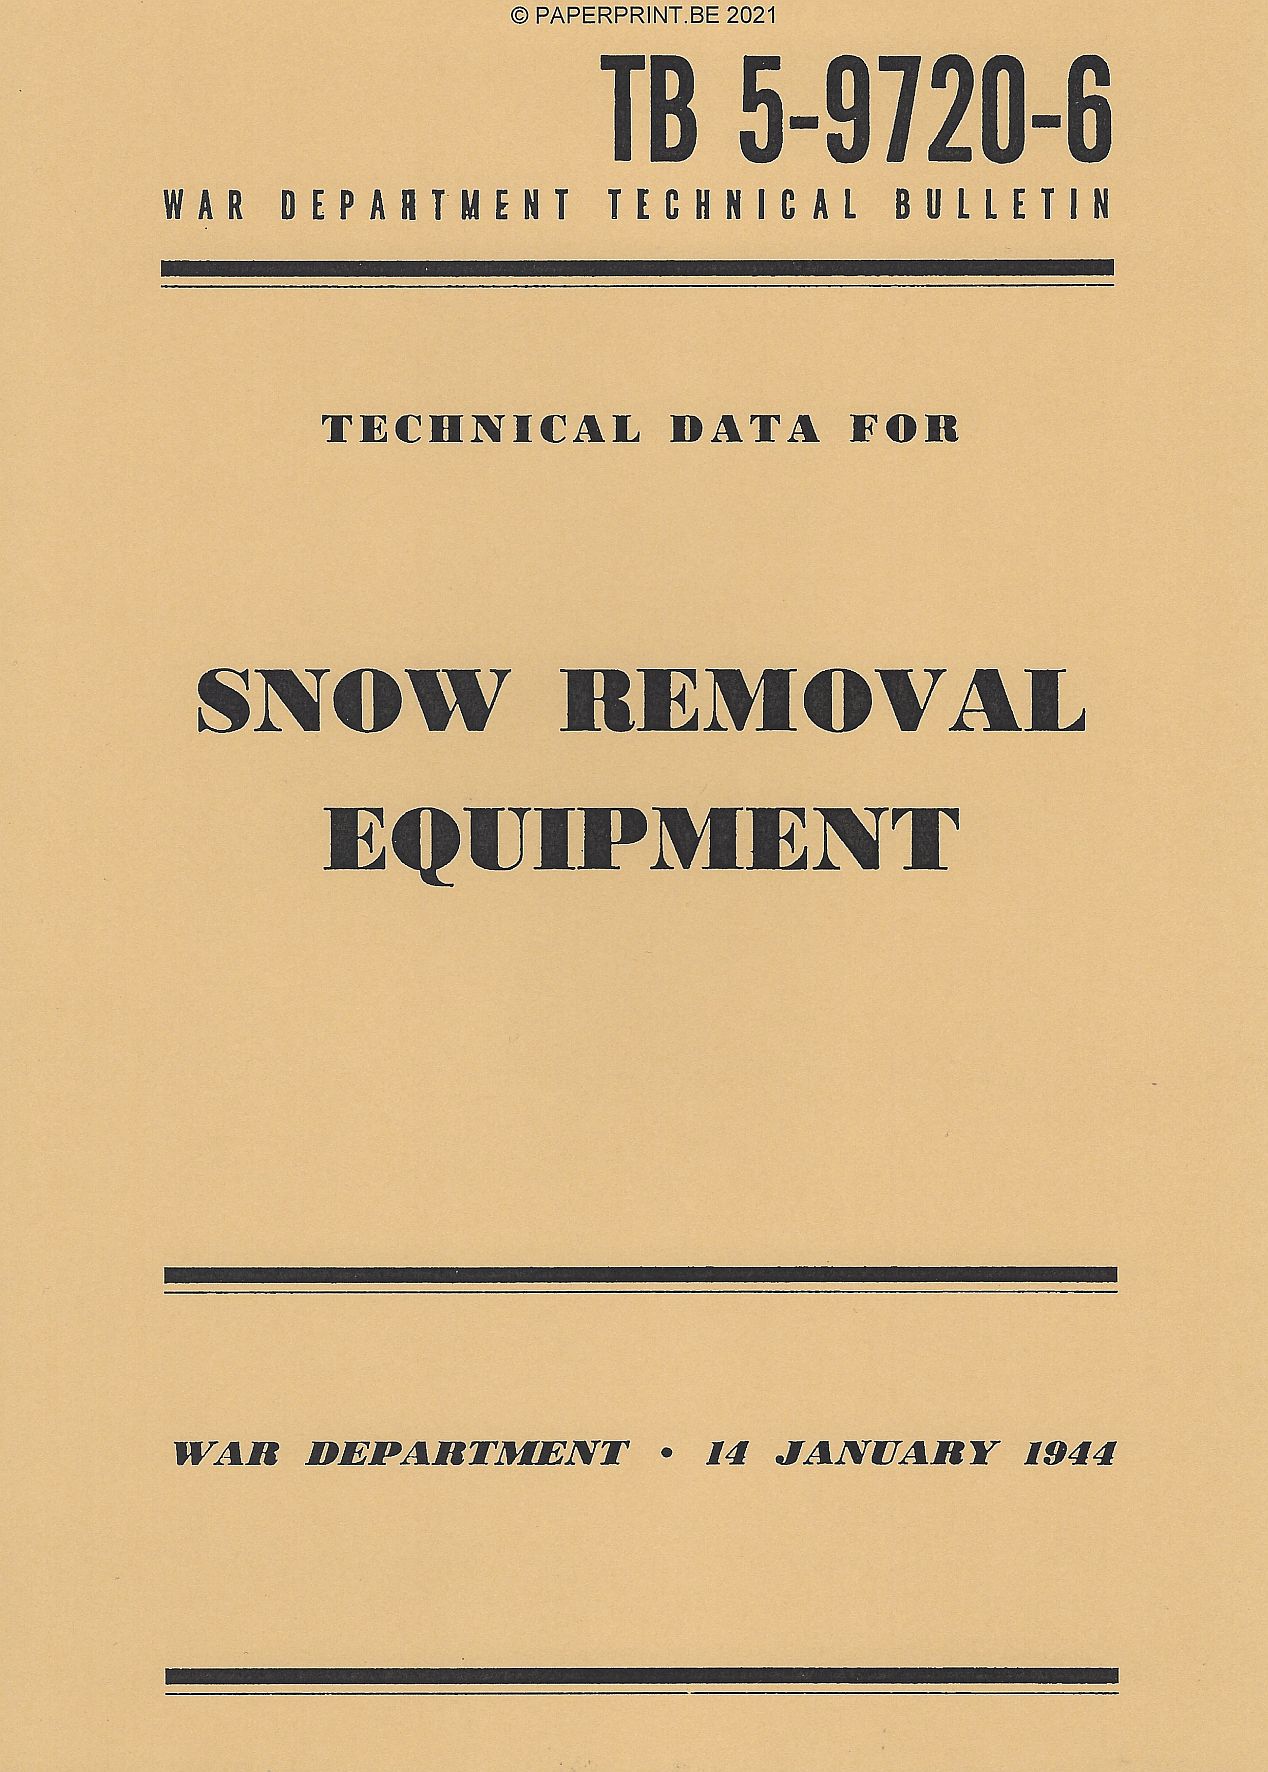 TB 5-9720-6 US TECHNICAL DATA FOR SNOW EMOVAL EQUIPMENT